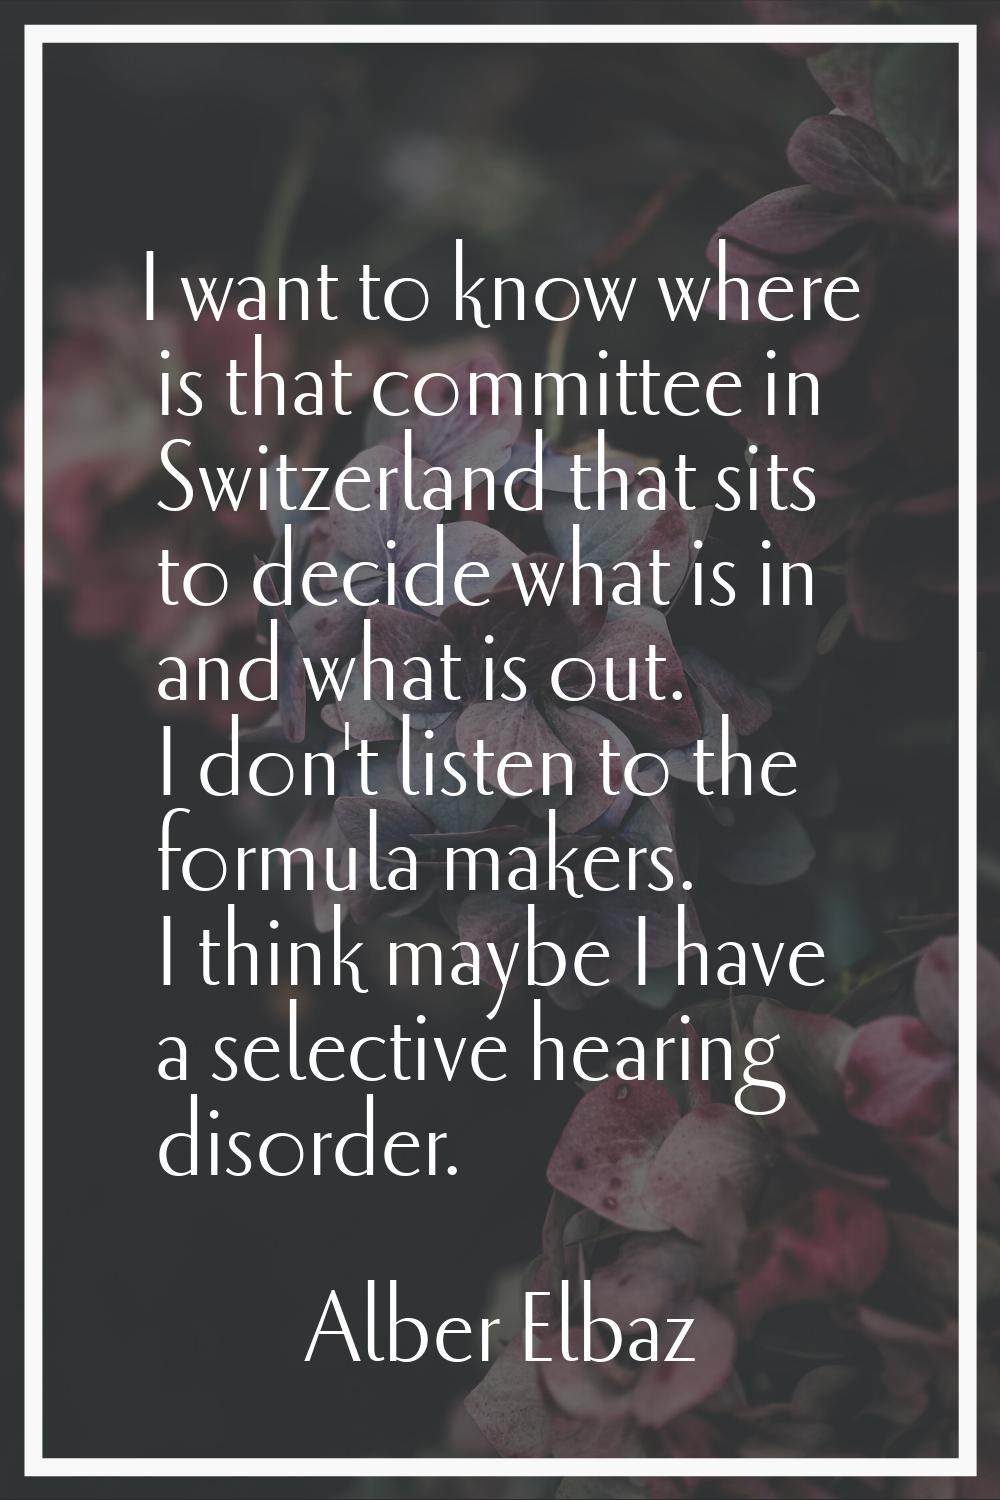 I want to know where is that committee in Switzerland that sits to decide what is in and what is ou